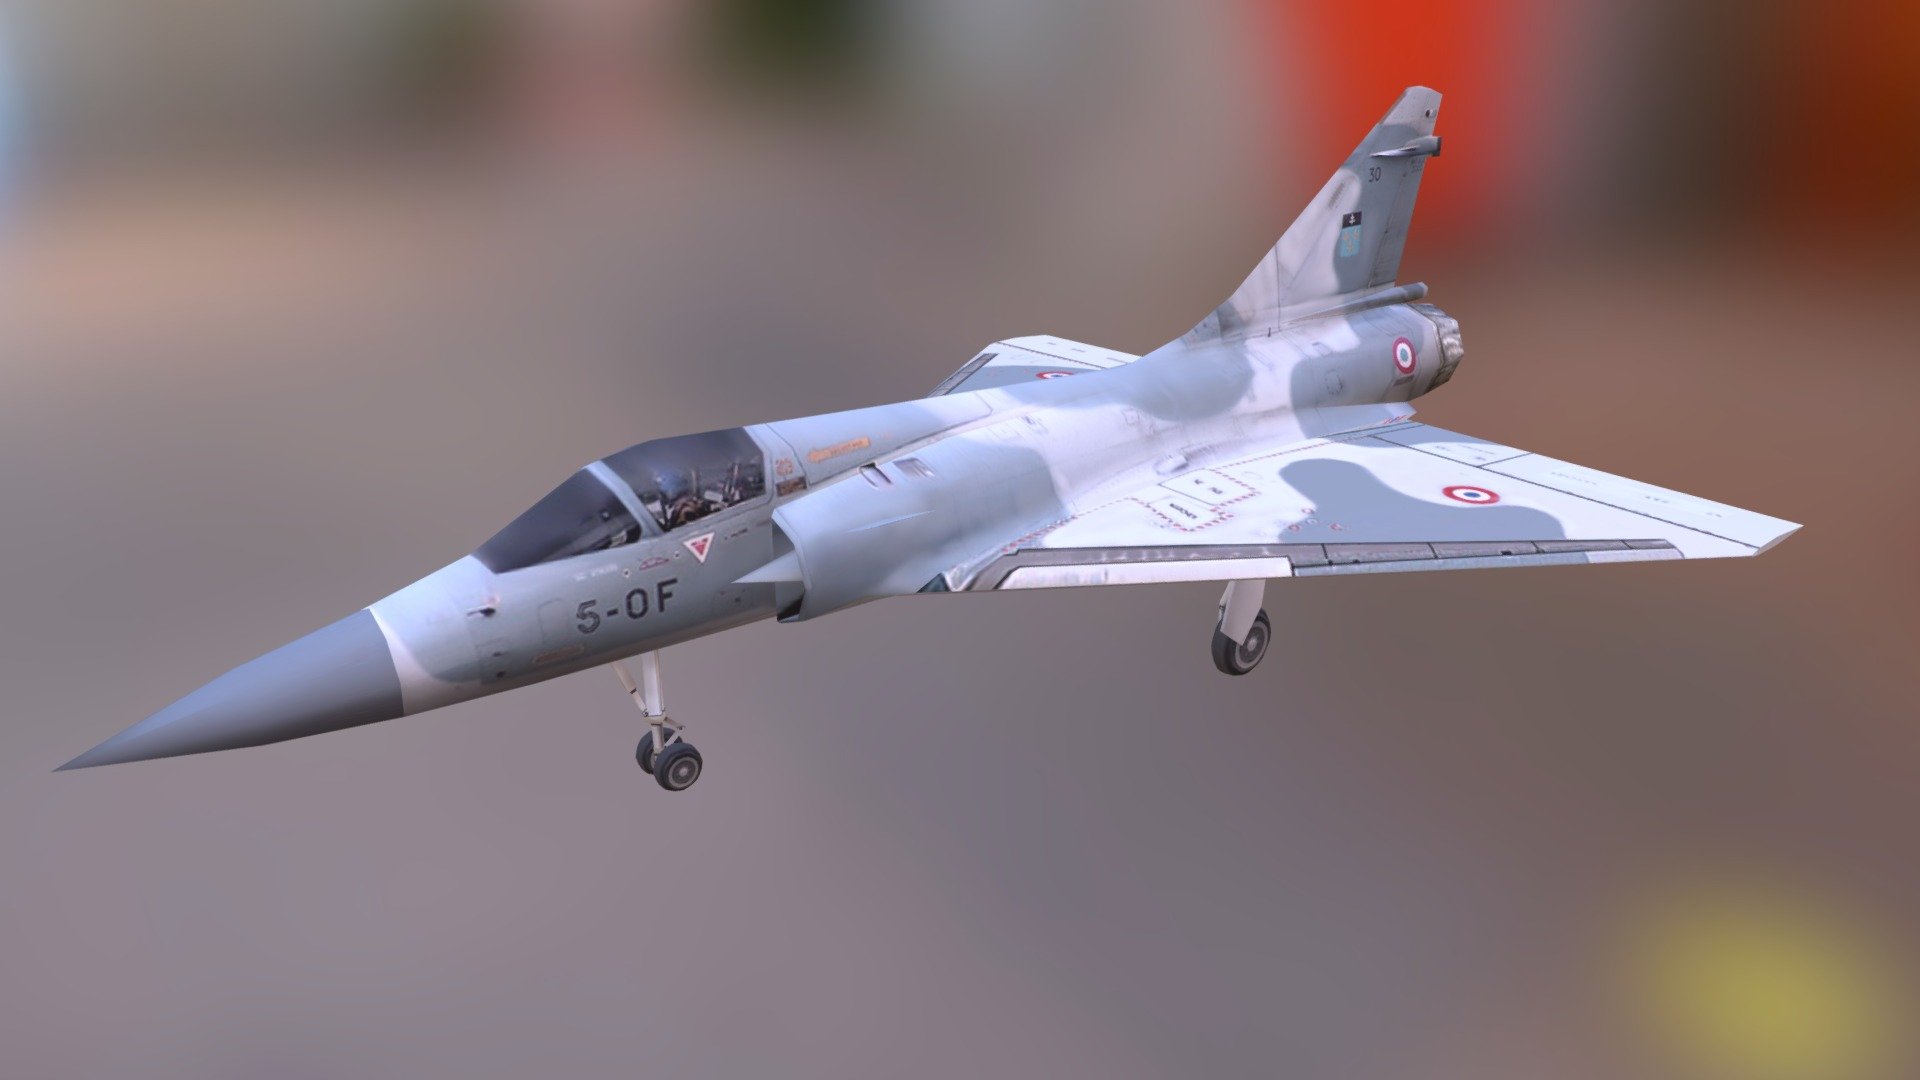 A model of the Dassault Mirage 2000 fighter aircraft 3d model